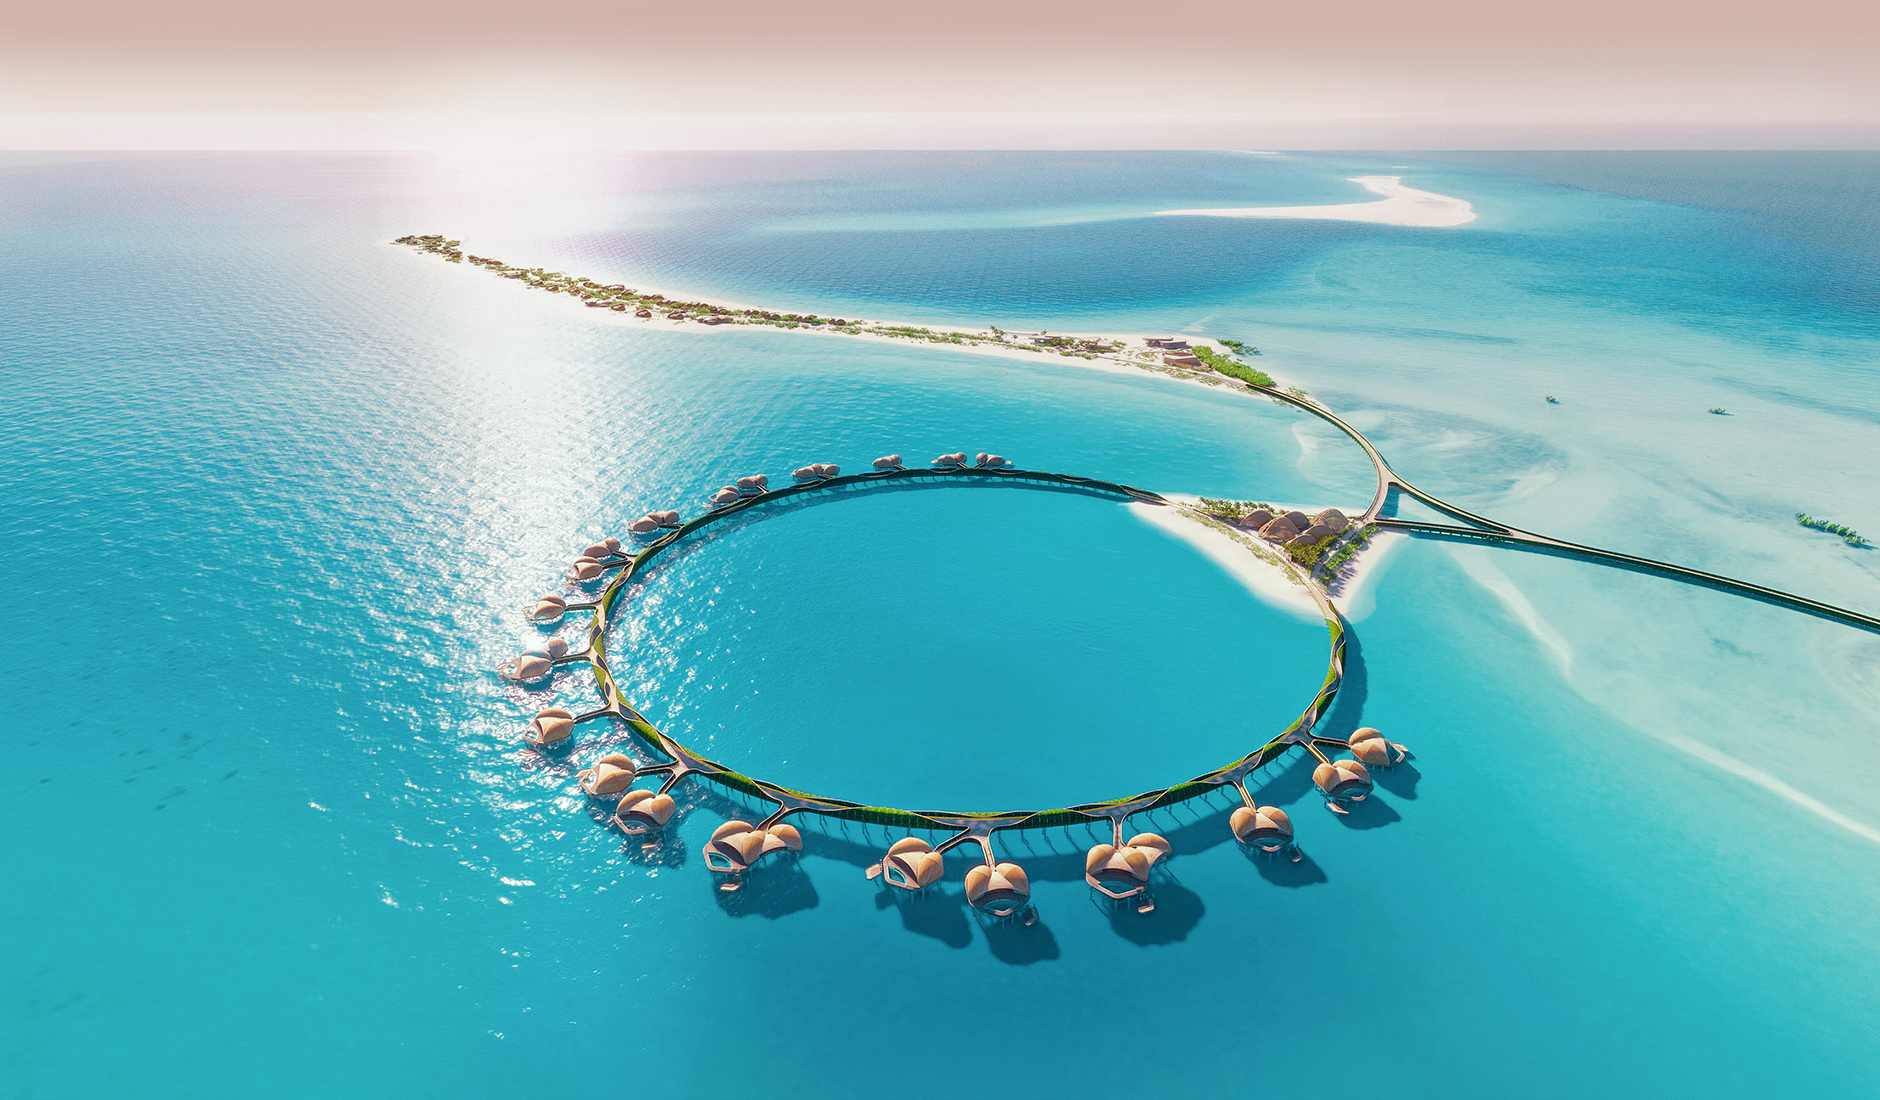 Dubai's Atlantis The Royal will open late January 2023, hotel opening  celebration delayed - Hotelier Middle East